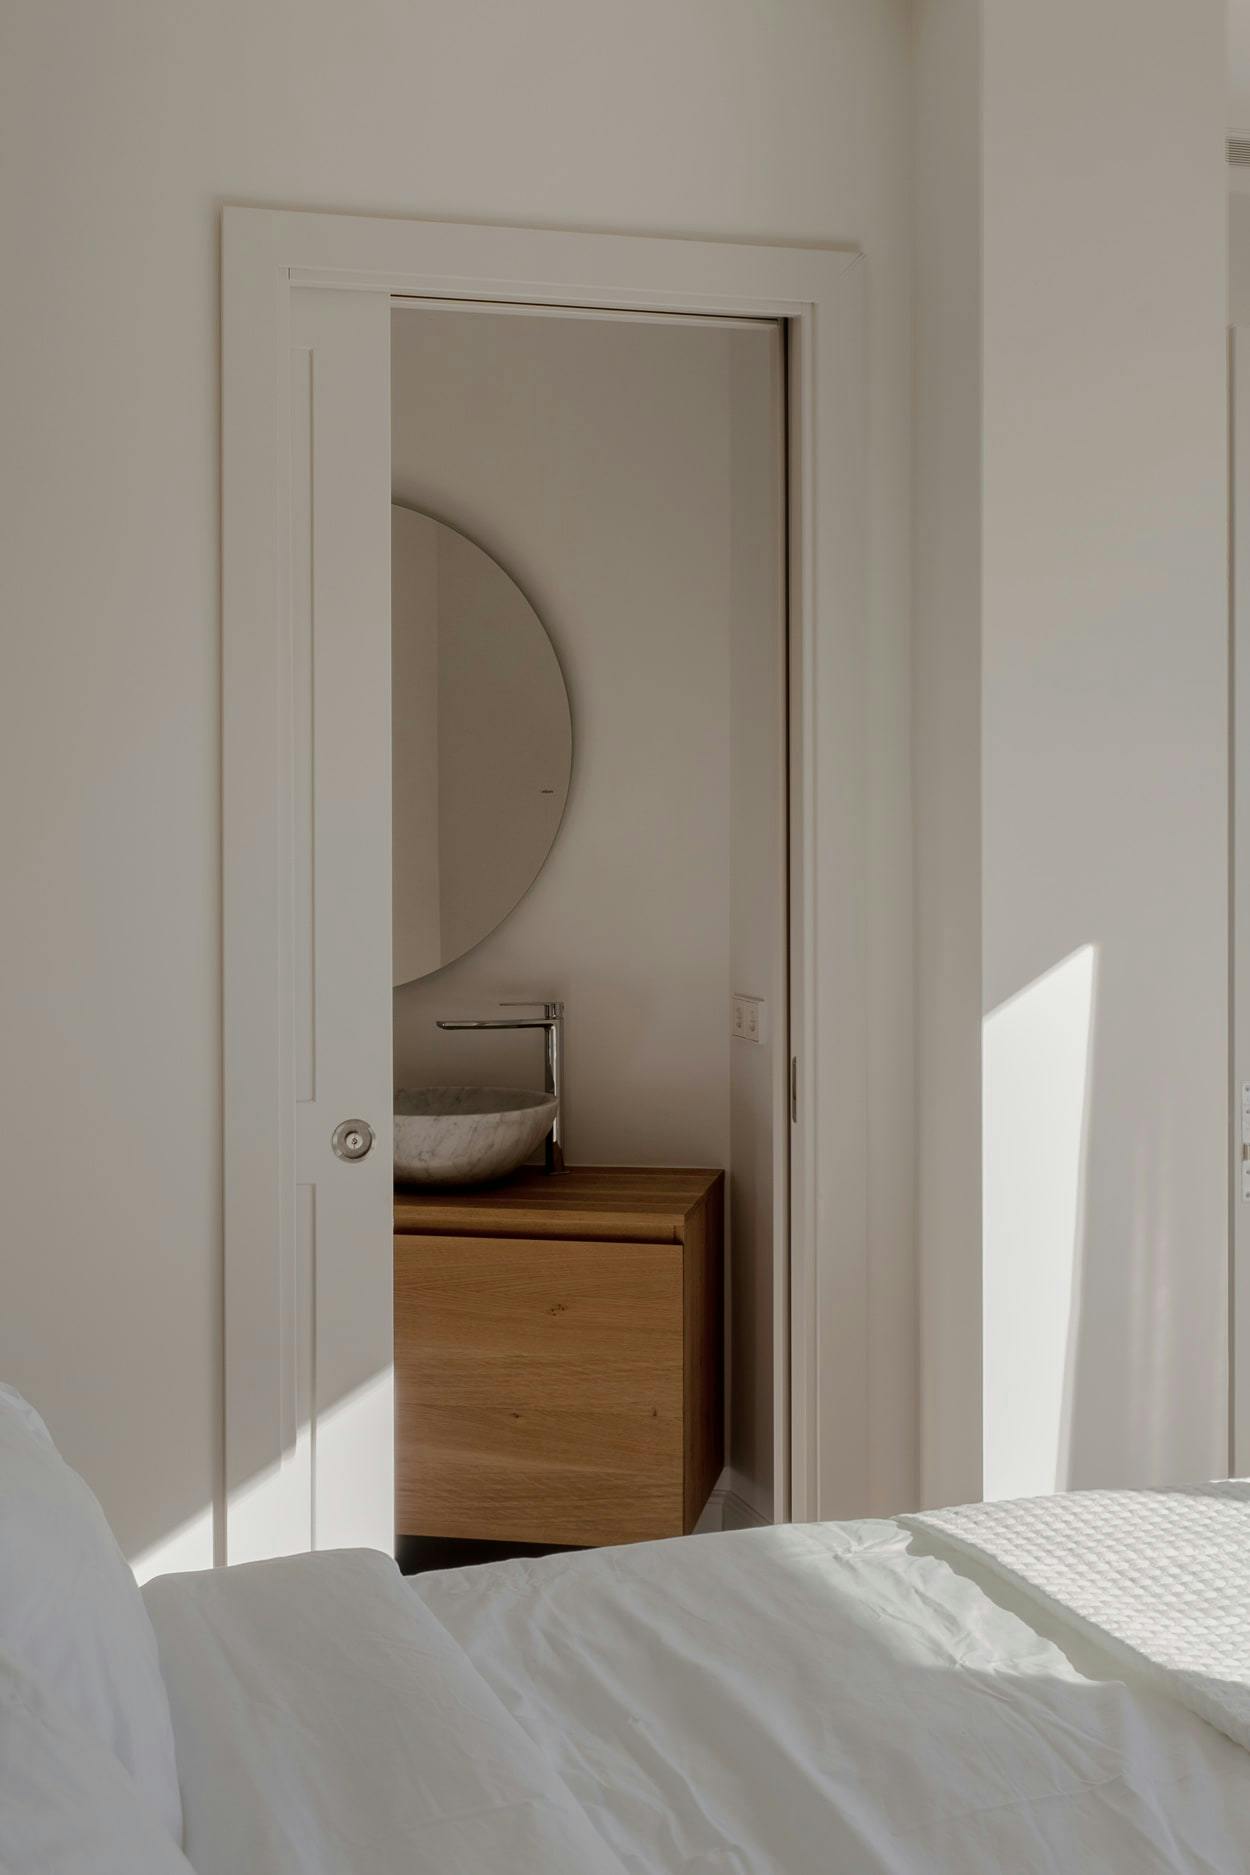 The image features a bedroom with a neatly made bed, a mirror, a dresser, and a door.